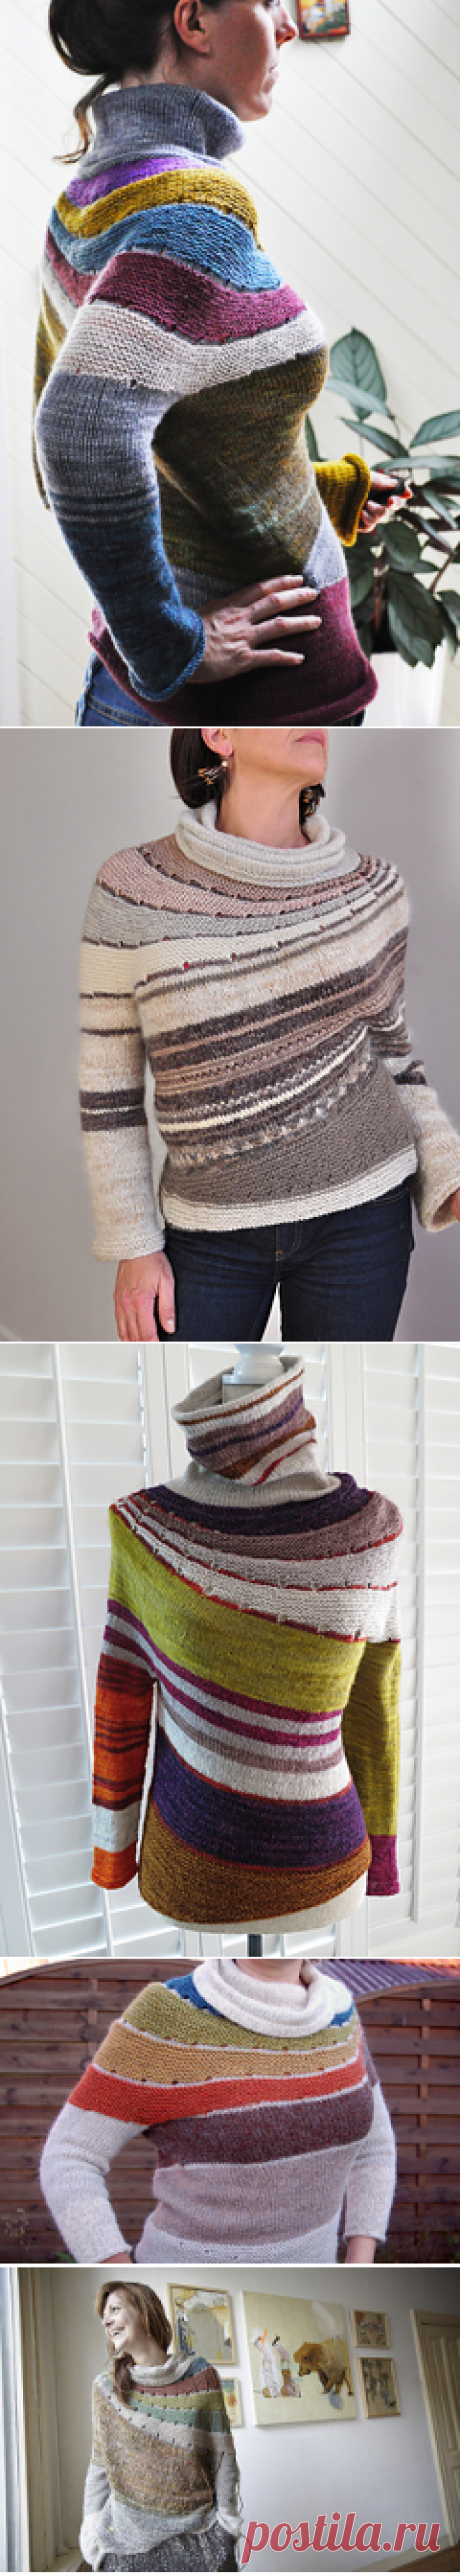 Ravelry: Enchanted Mesa pattern by Stephen West